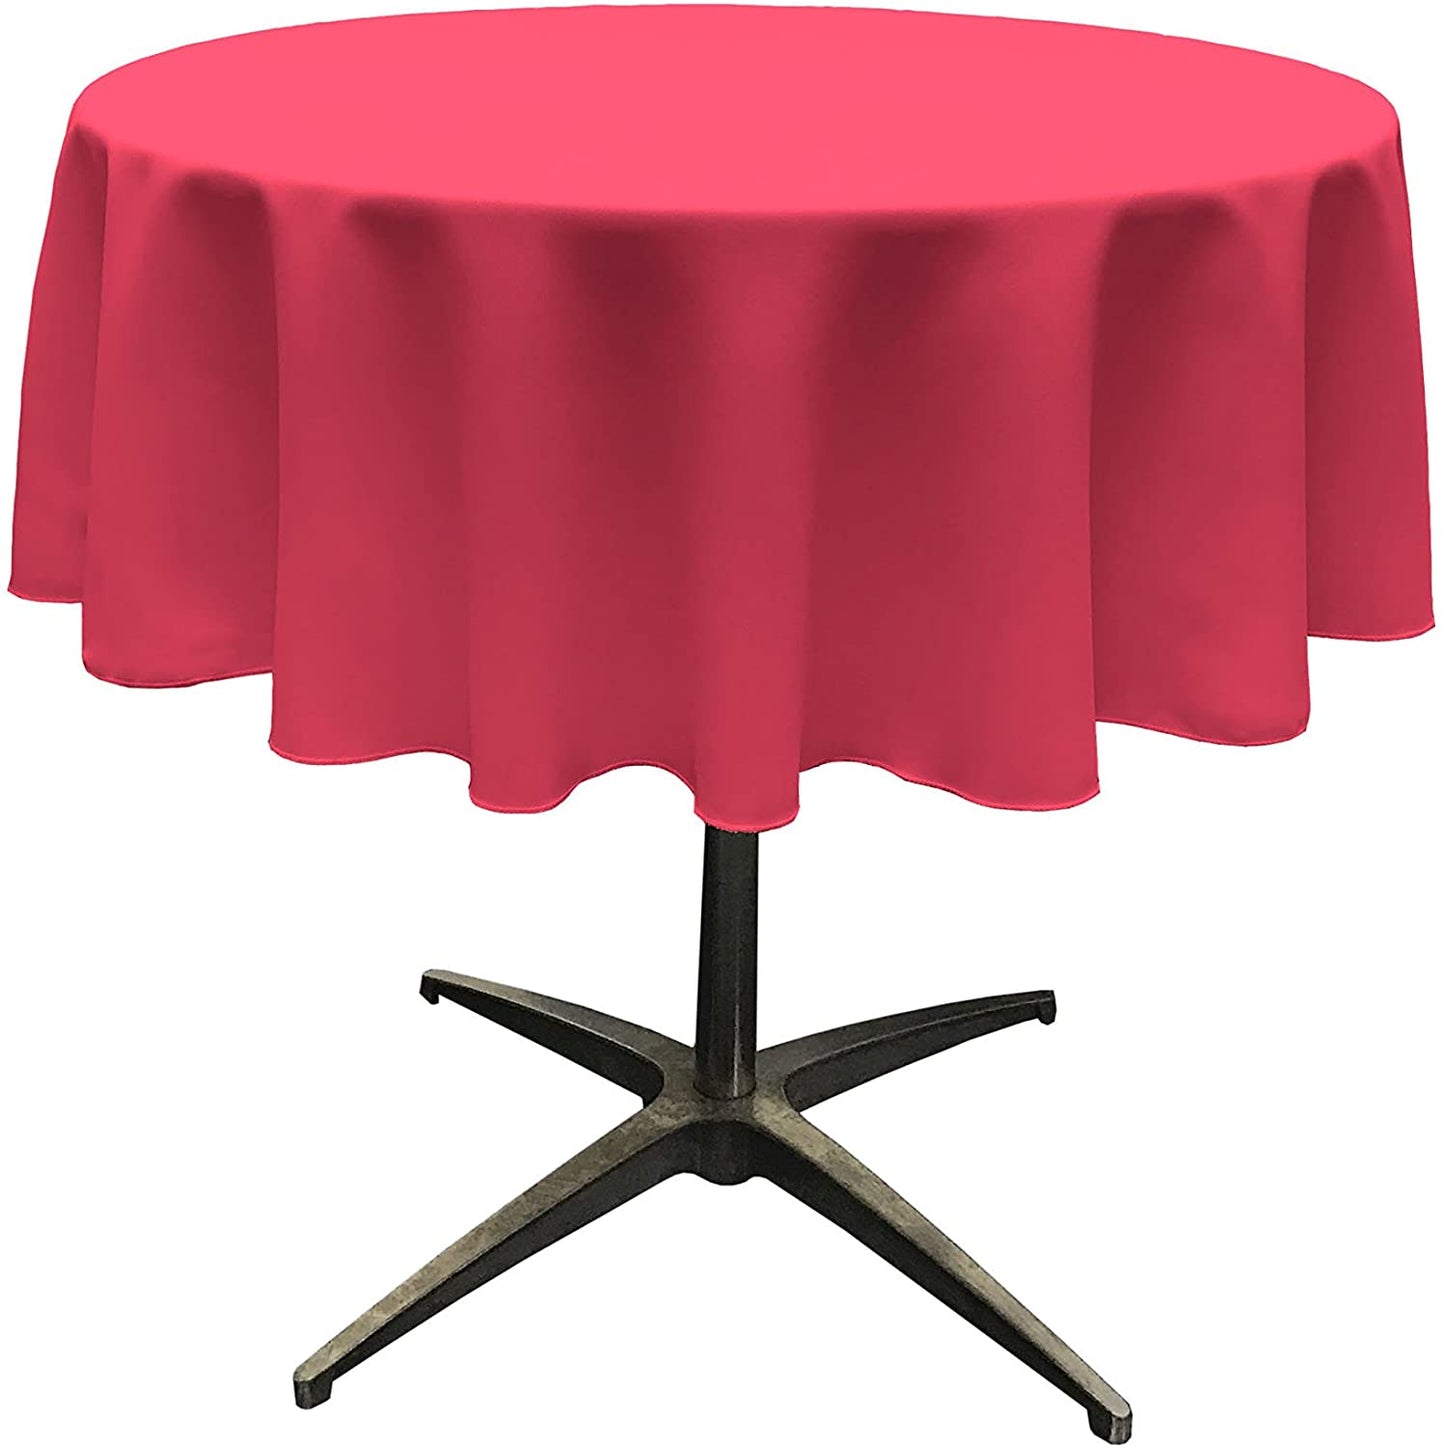 Polyester Poplin Washable Round Tablecloth, Stain and Wrinkle Resistant Table Cover Fuchsia